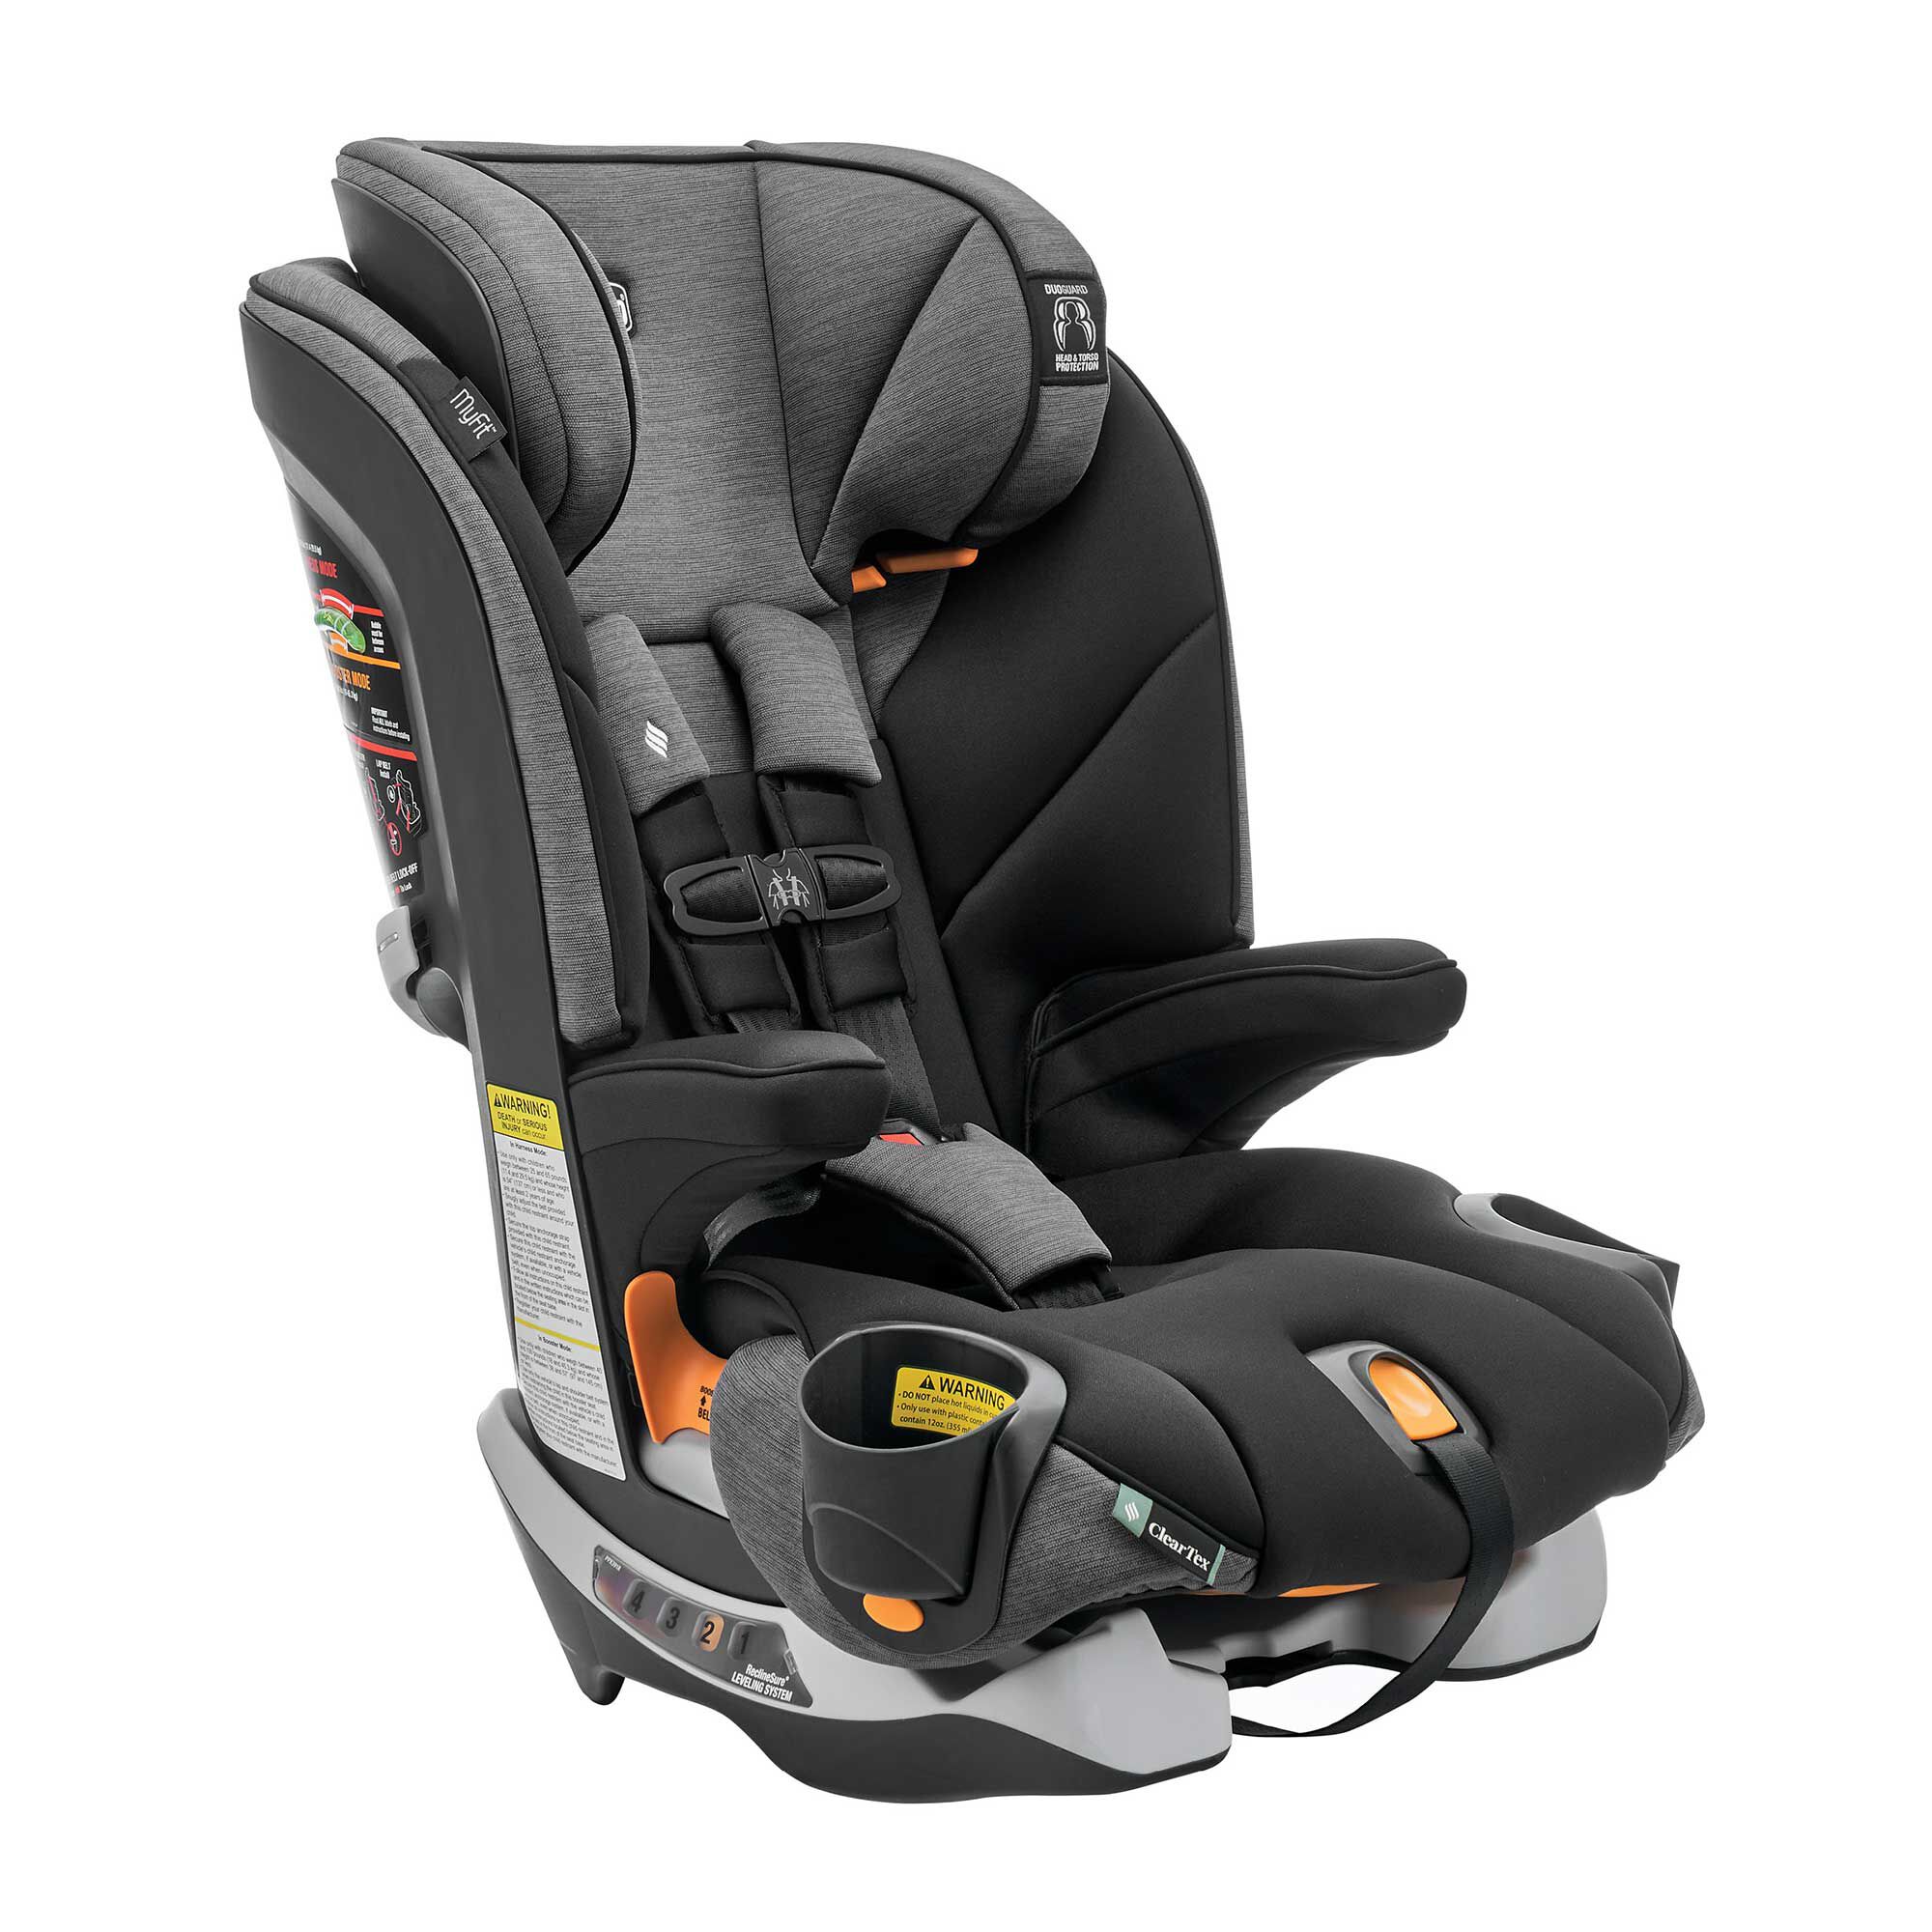 Chicco myfit harness + booster seat #chicco #myfit #boosterseat